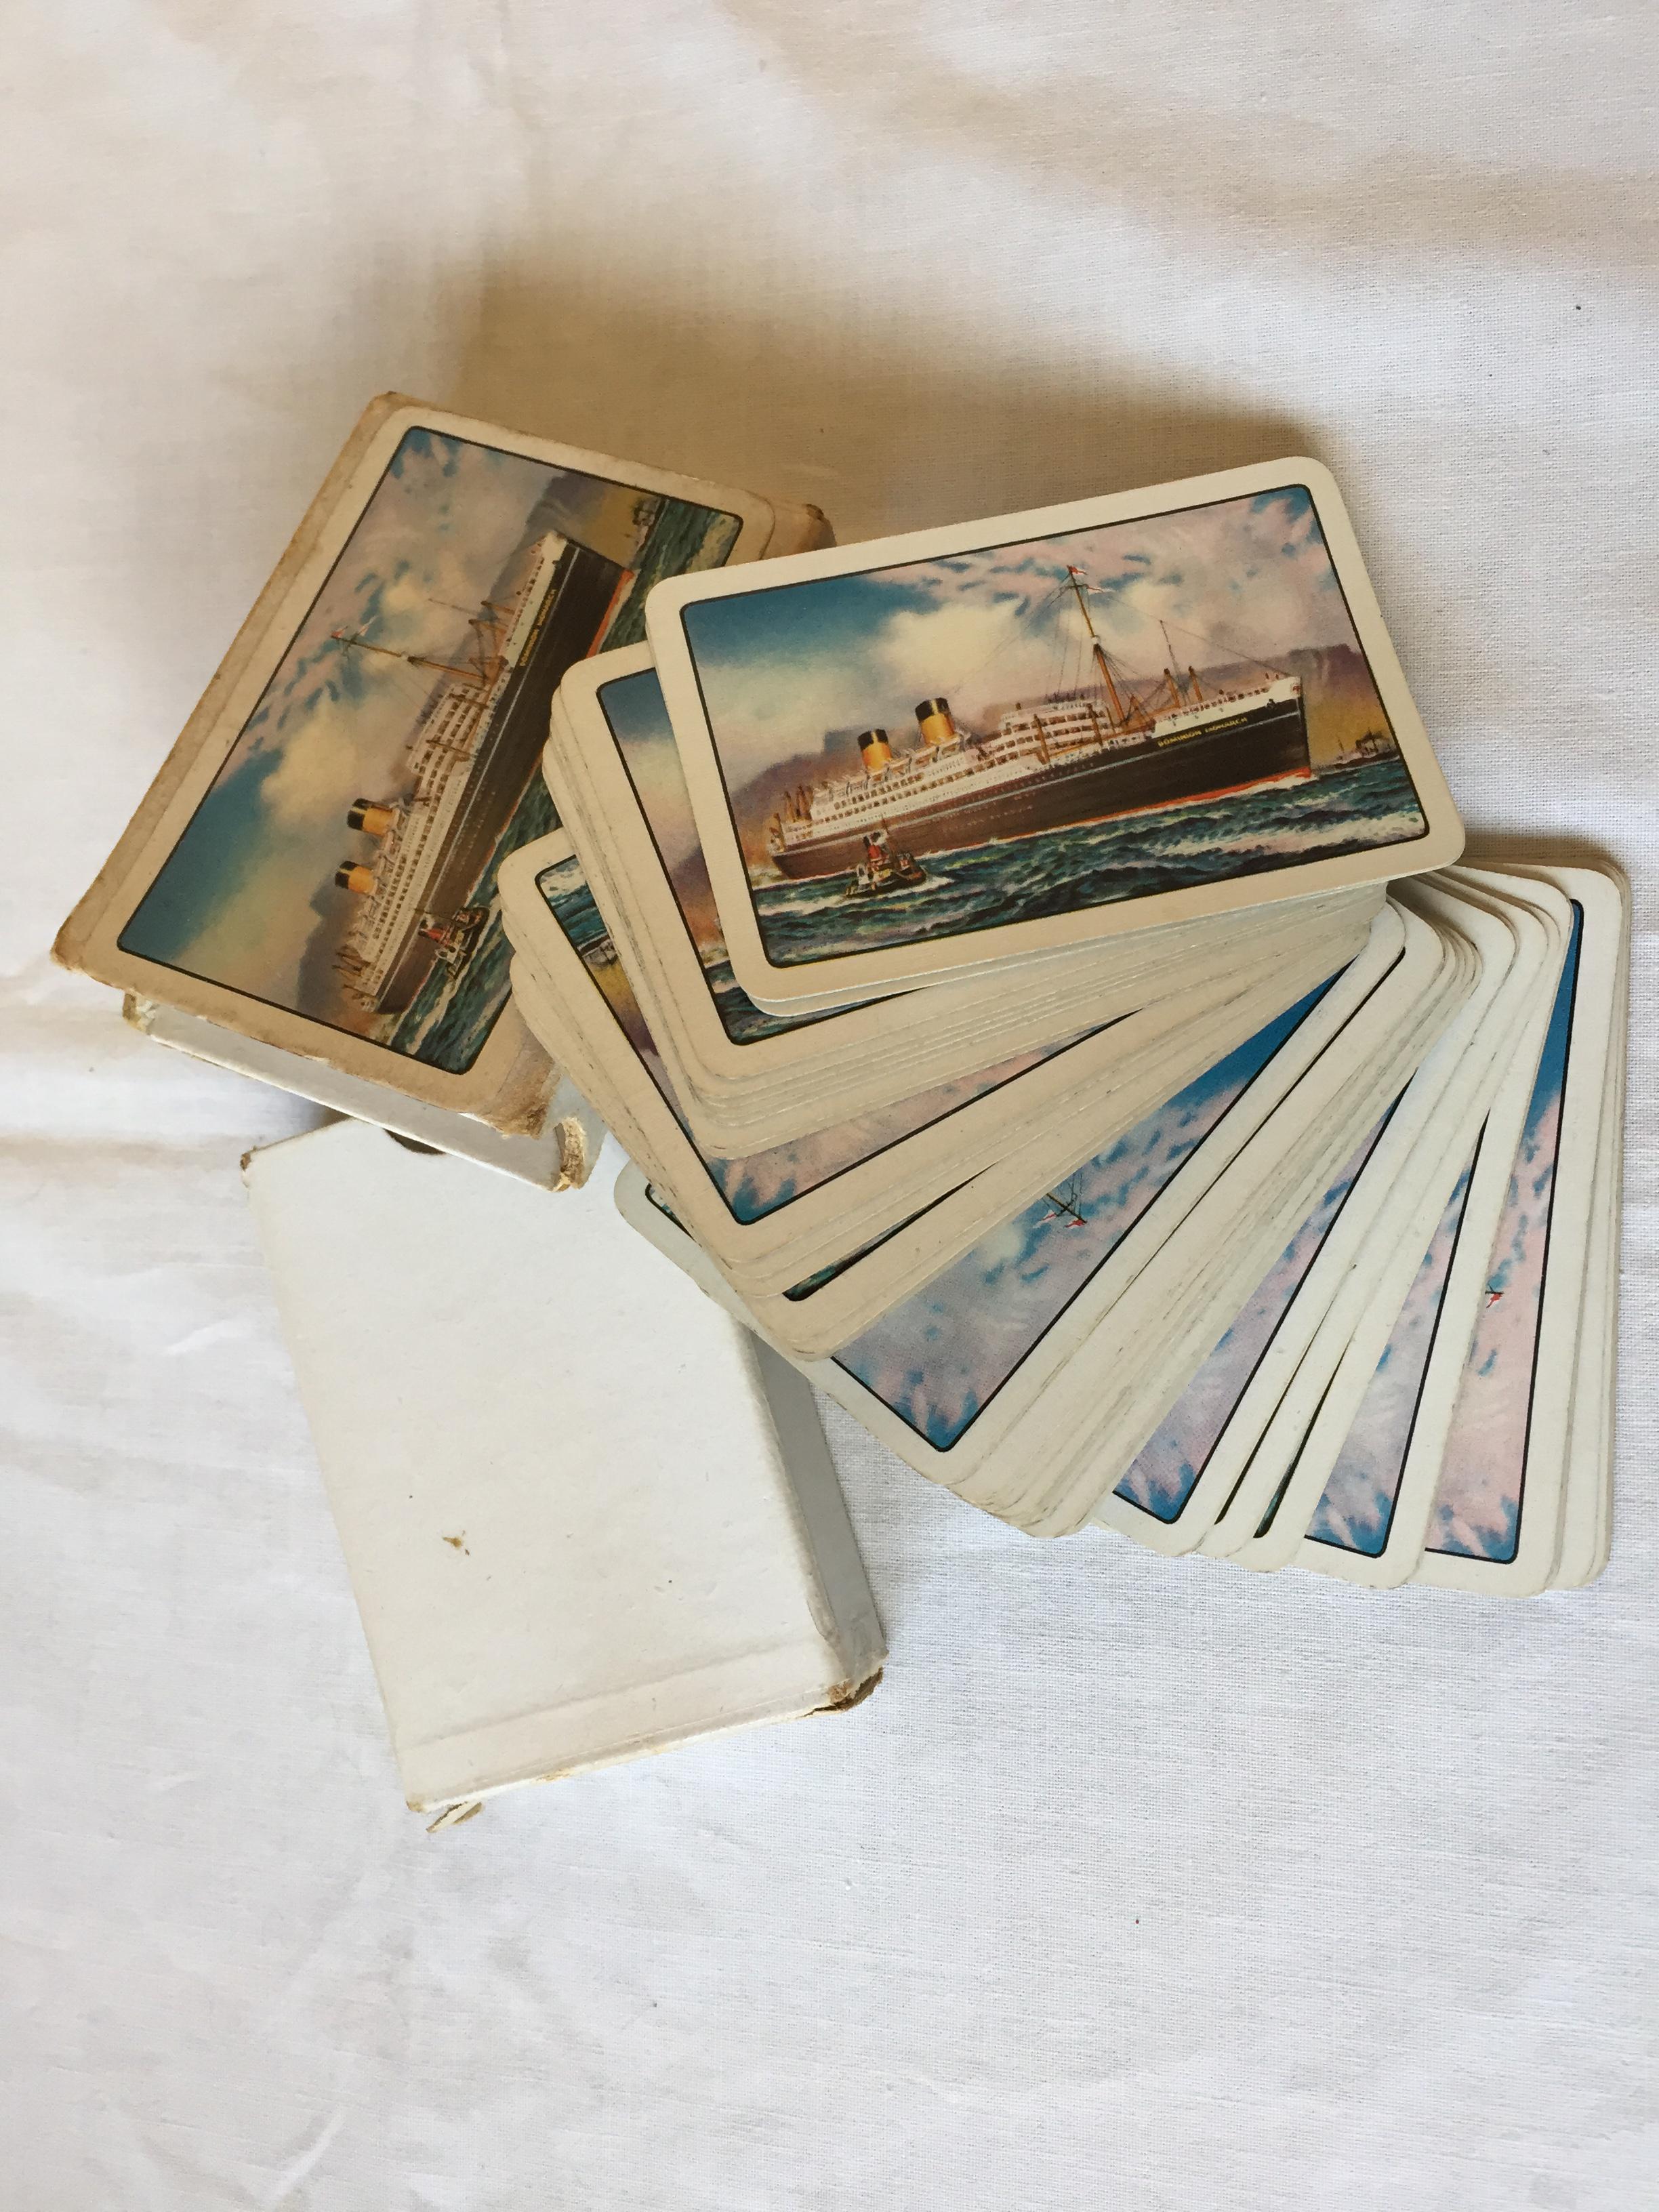 SET OF EARLY PLAYING CARDS FROM THE VESSEL DOMINION MONARCH